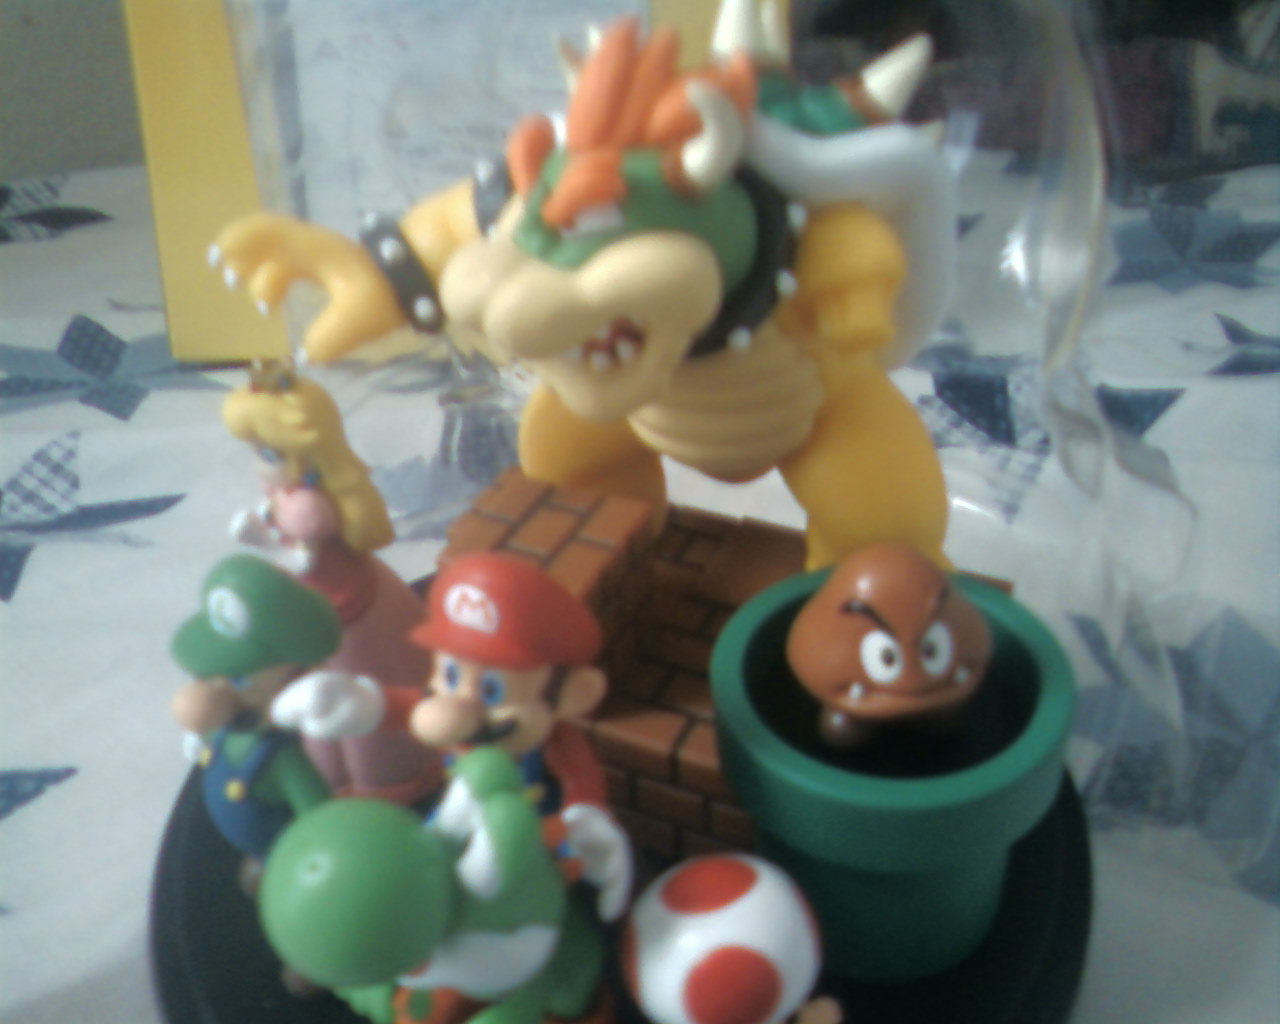 bowser_the_amputee_by_pocchama1996-d32rvq3.jpg